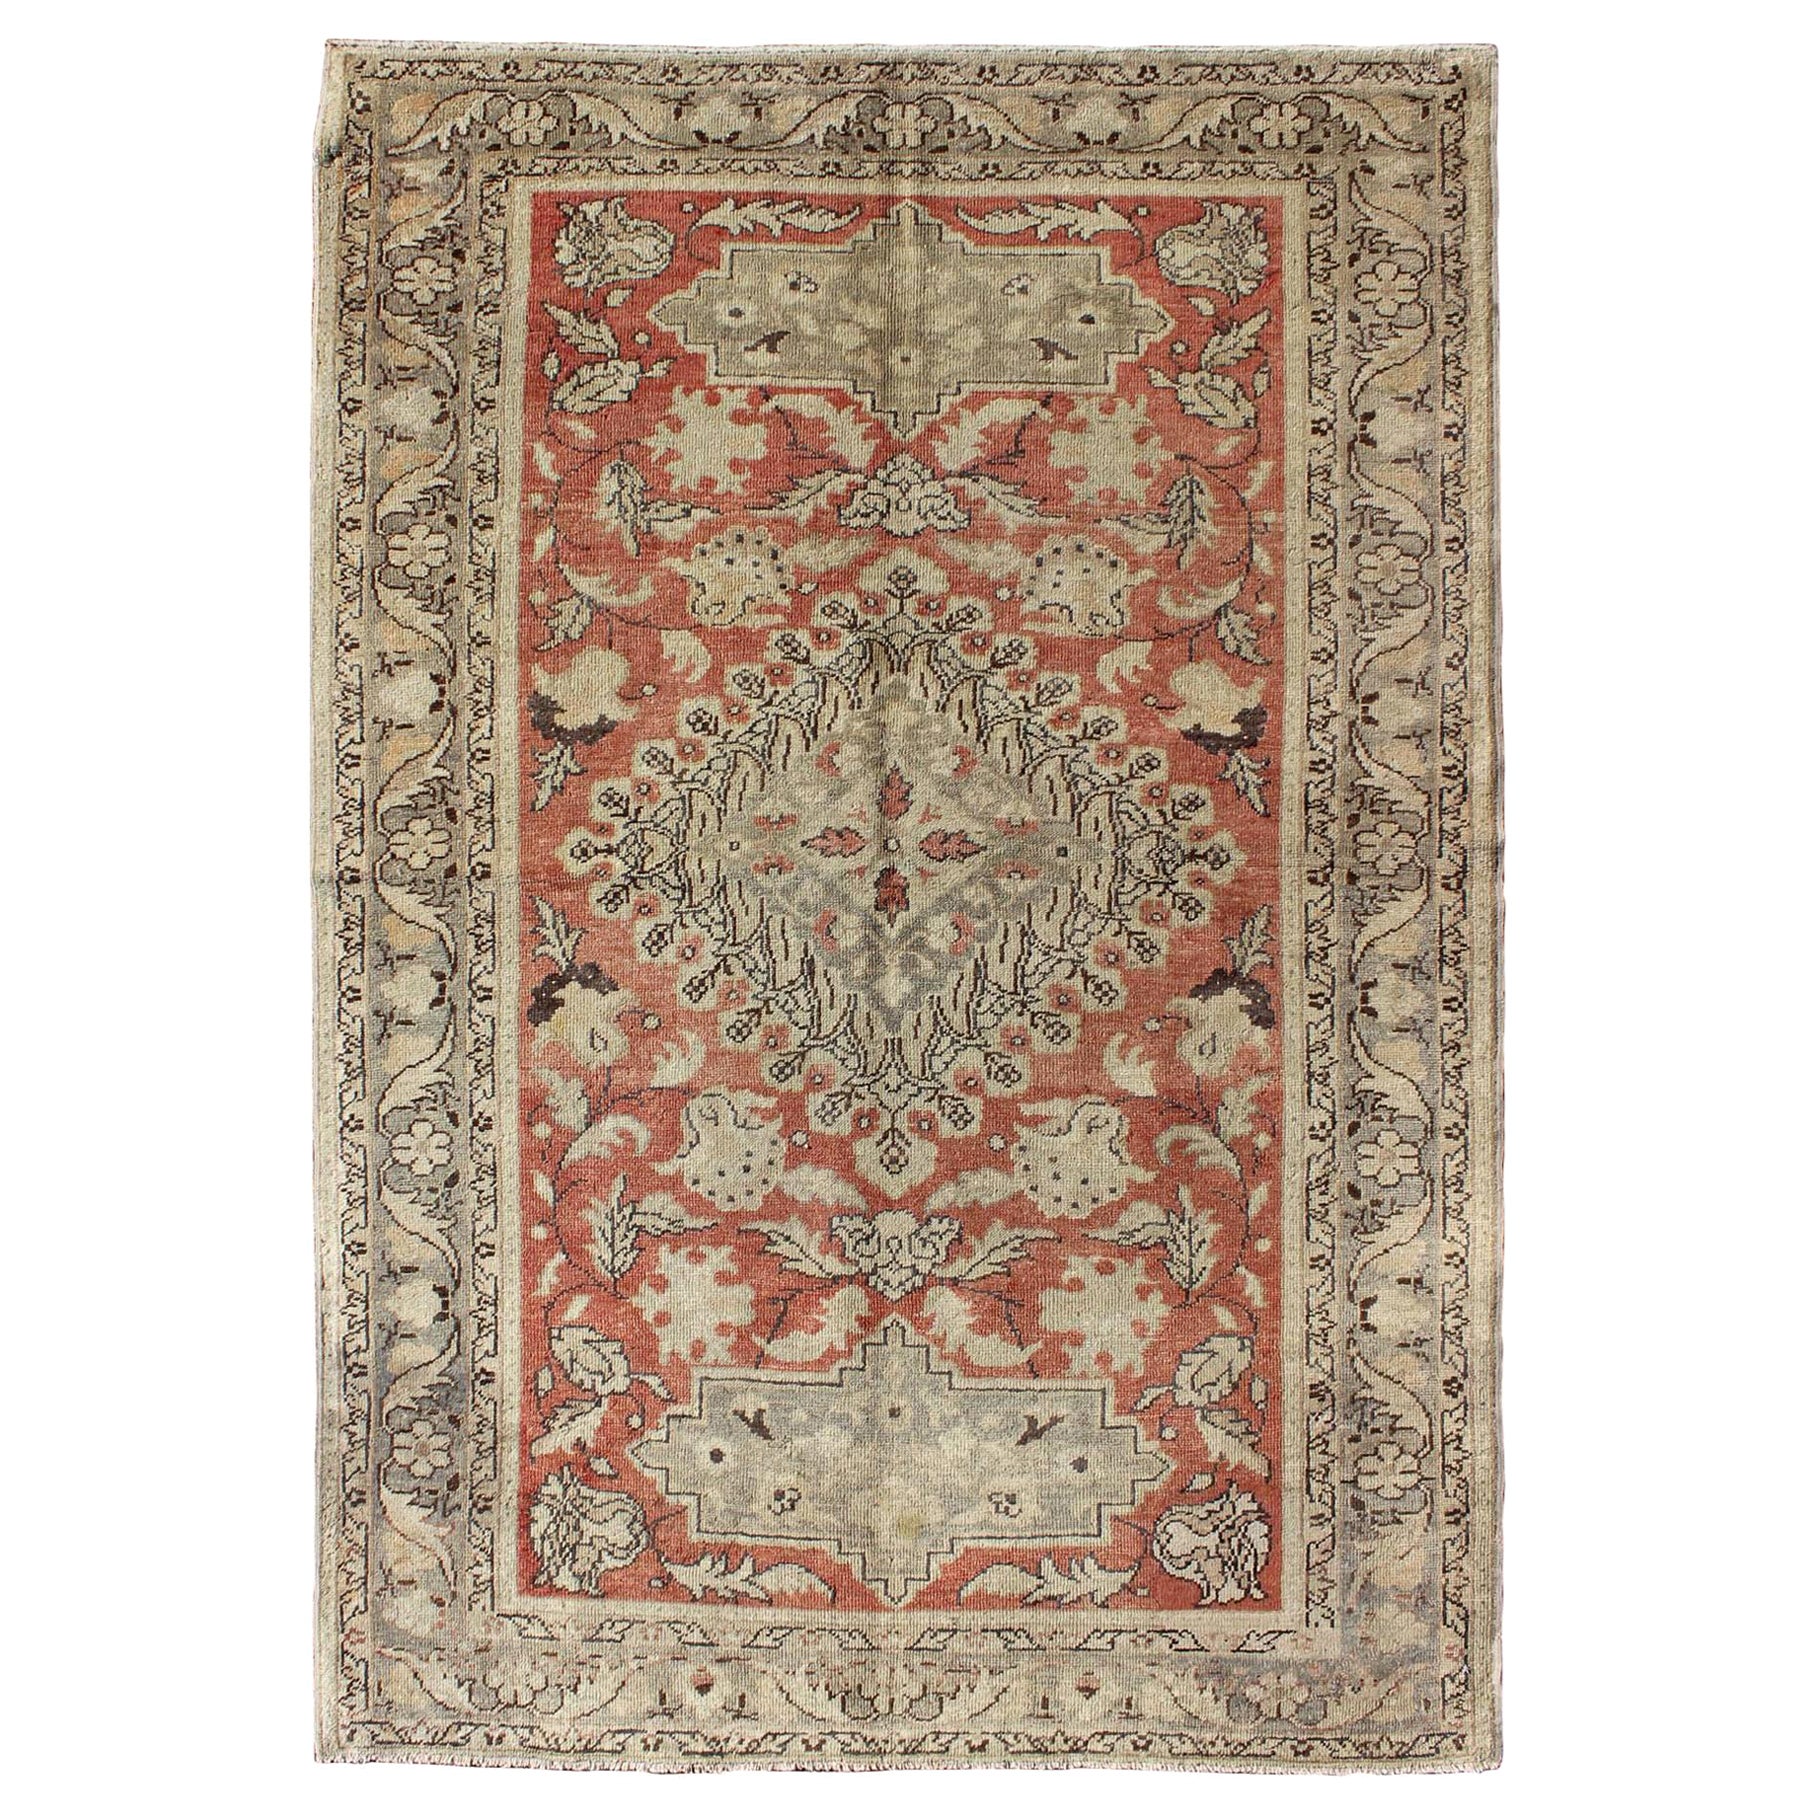 Antique Turkish Oushak Rug with Geometric Medallion and Floral Designs